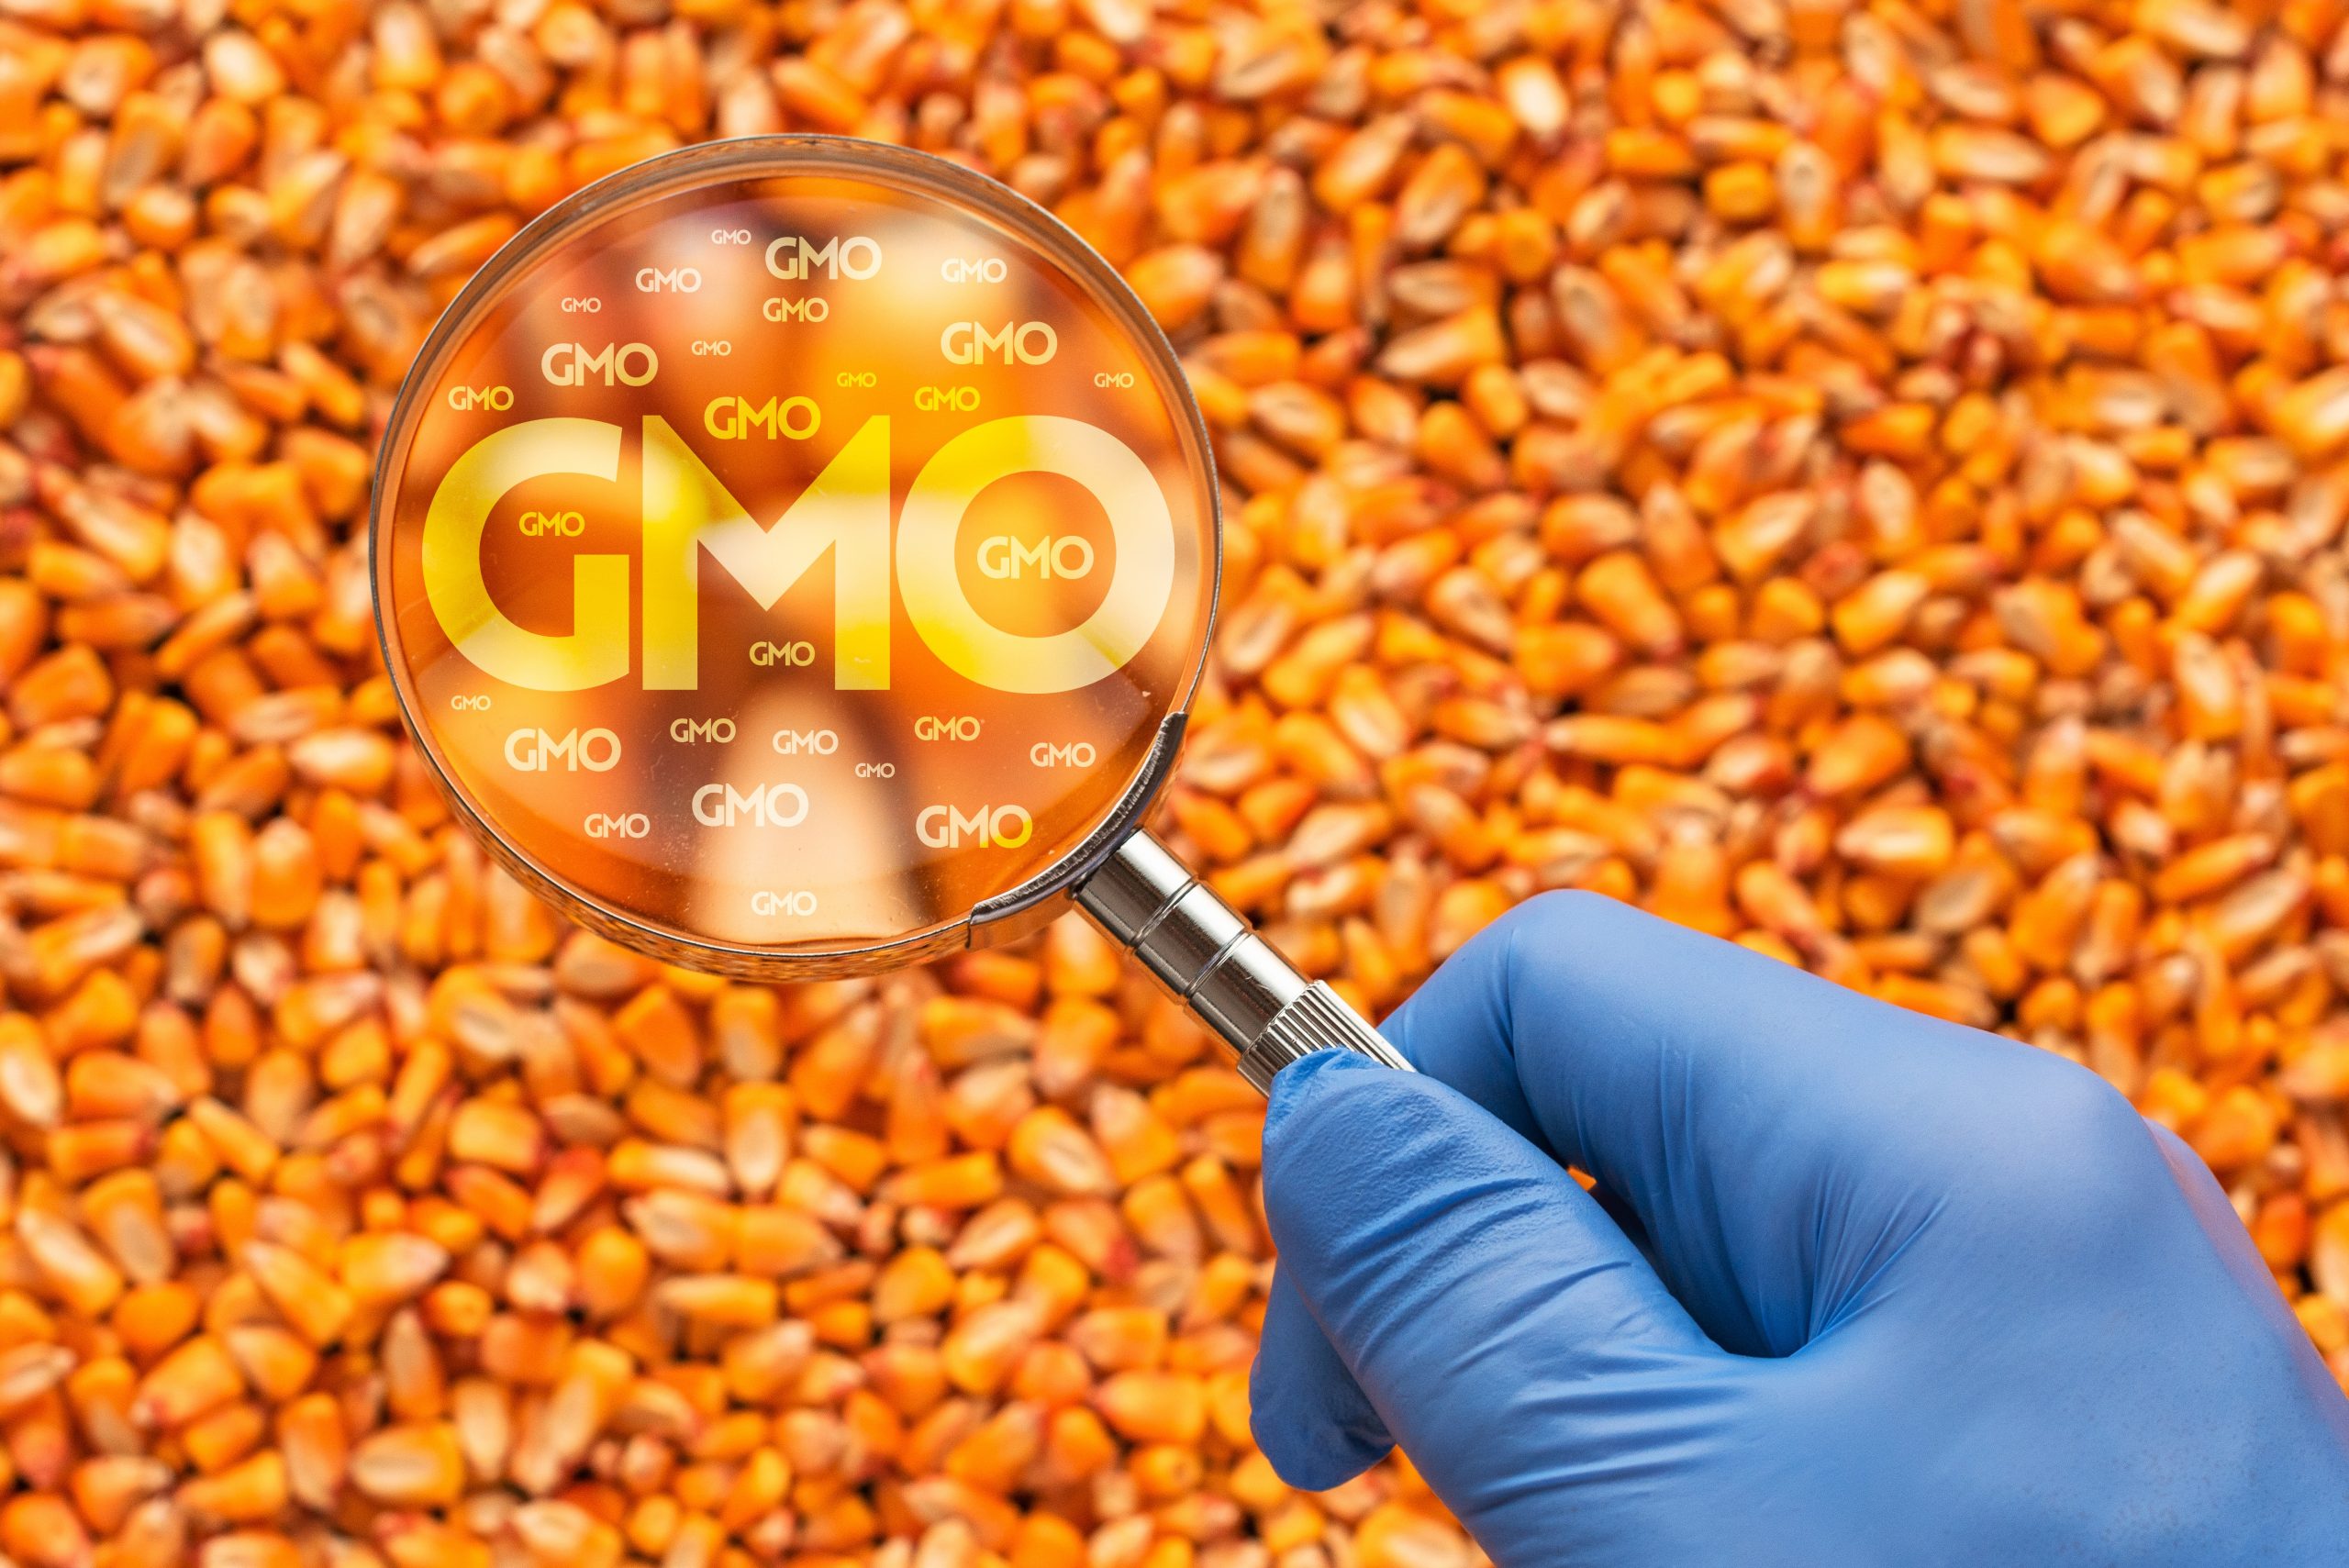 Magnifying glass with GMO